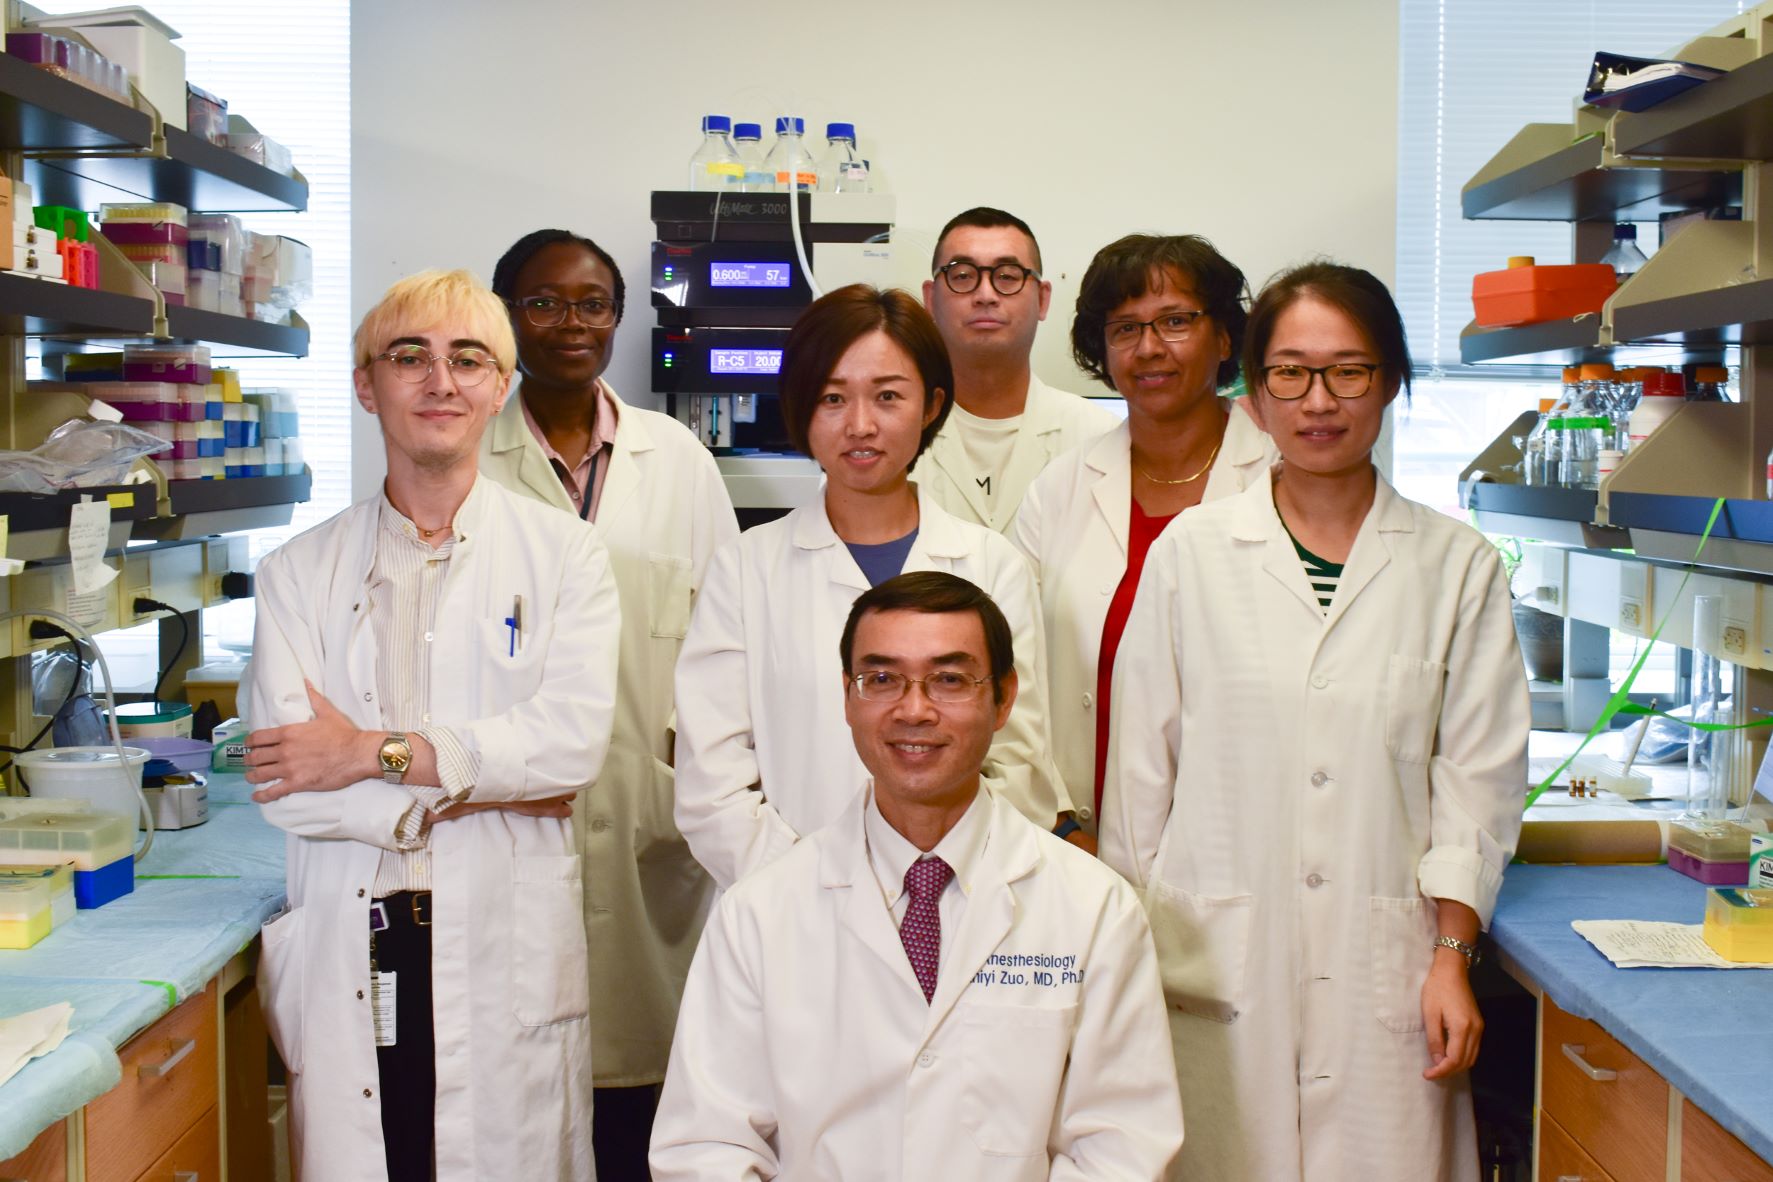 University of Virginia Anesthesiology Dr. Zuo's Lab Team